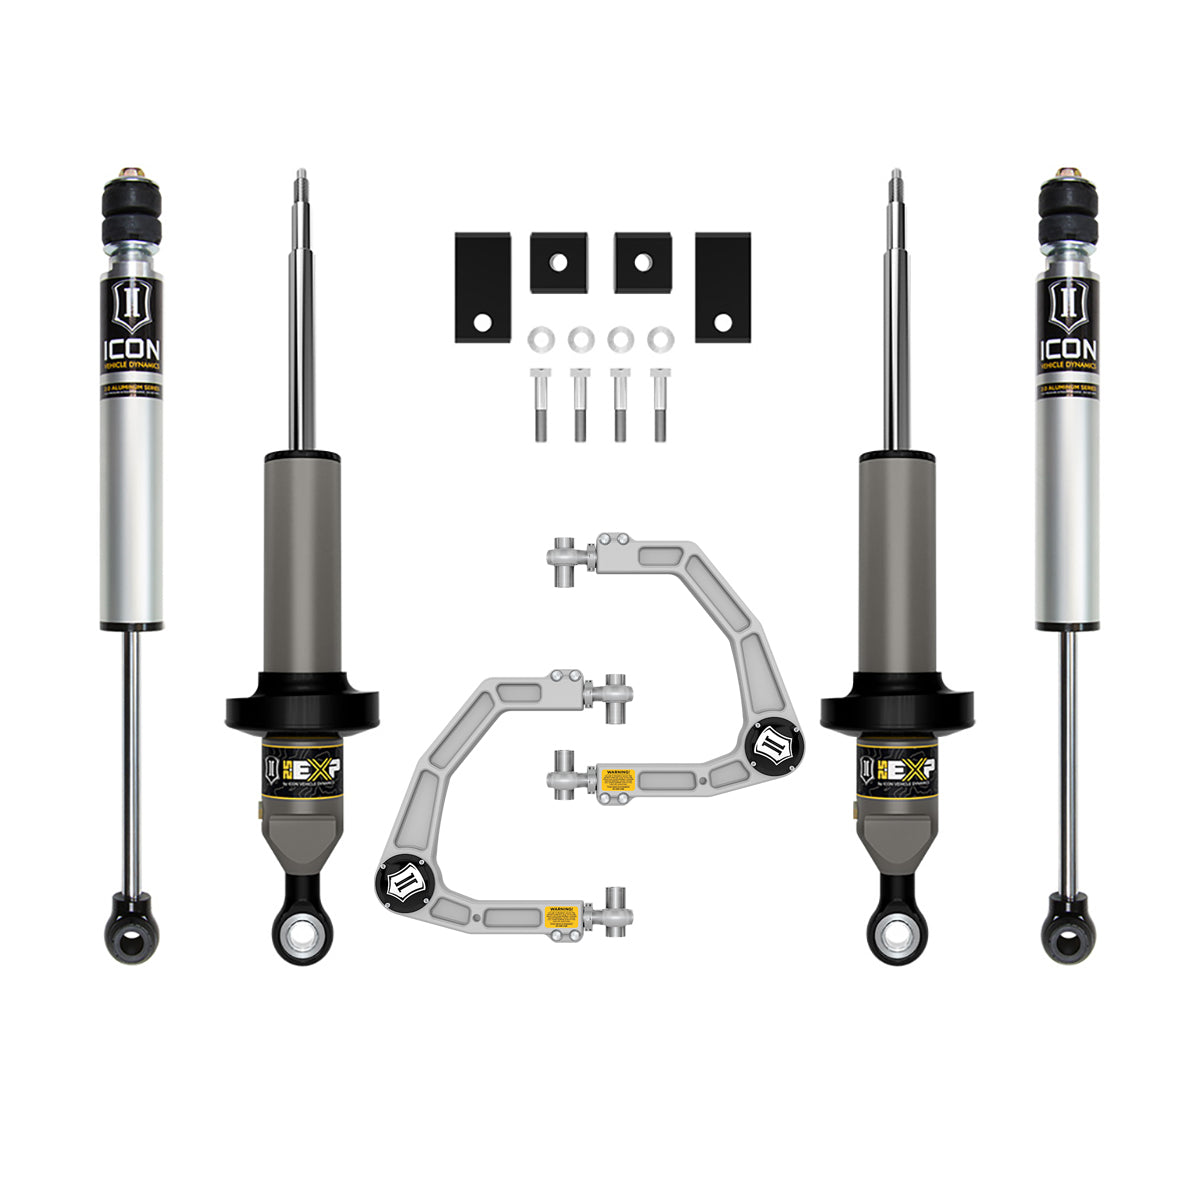 '22-23 Toyota Tundra Icon Stage 2 Billet Suspension System parts